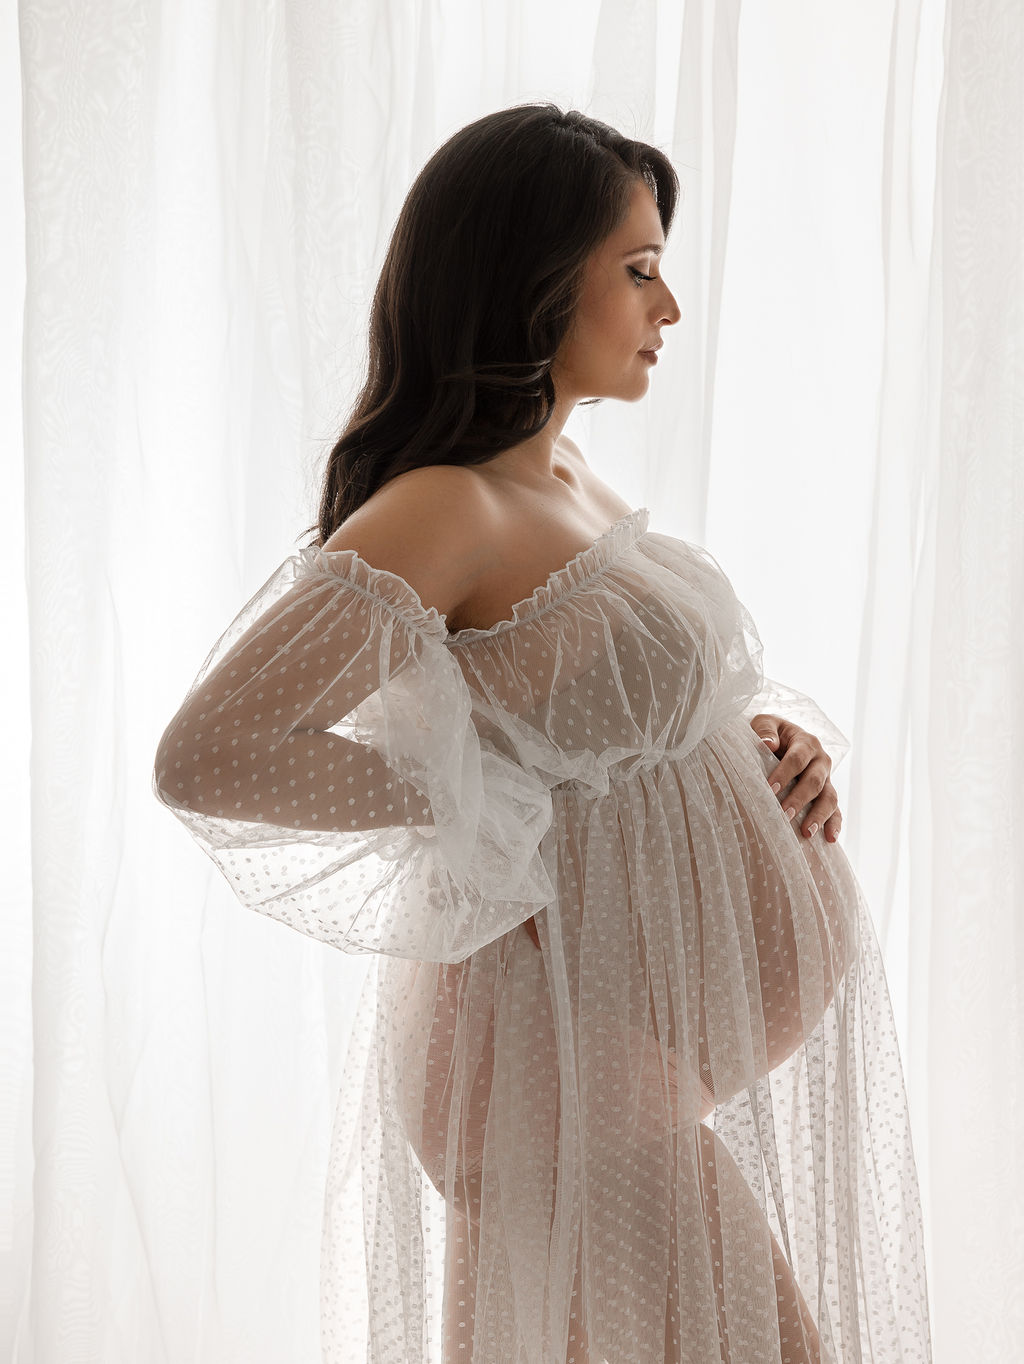 pregnant woman in sheer gown standing near a window Central Oregon OB-GYN